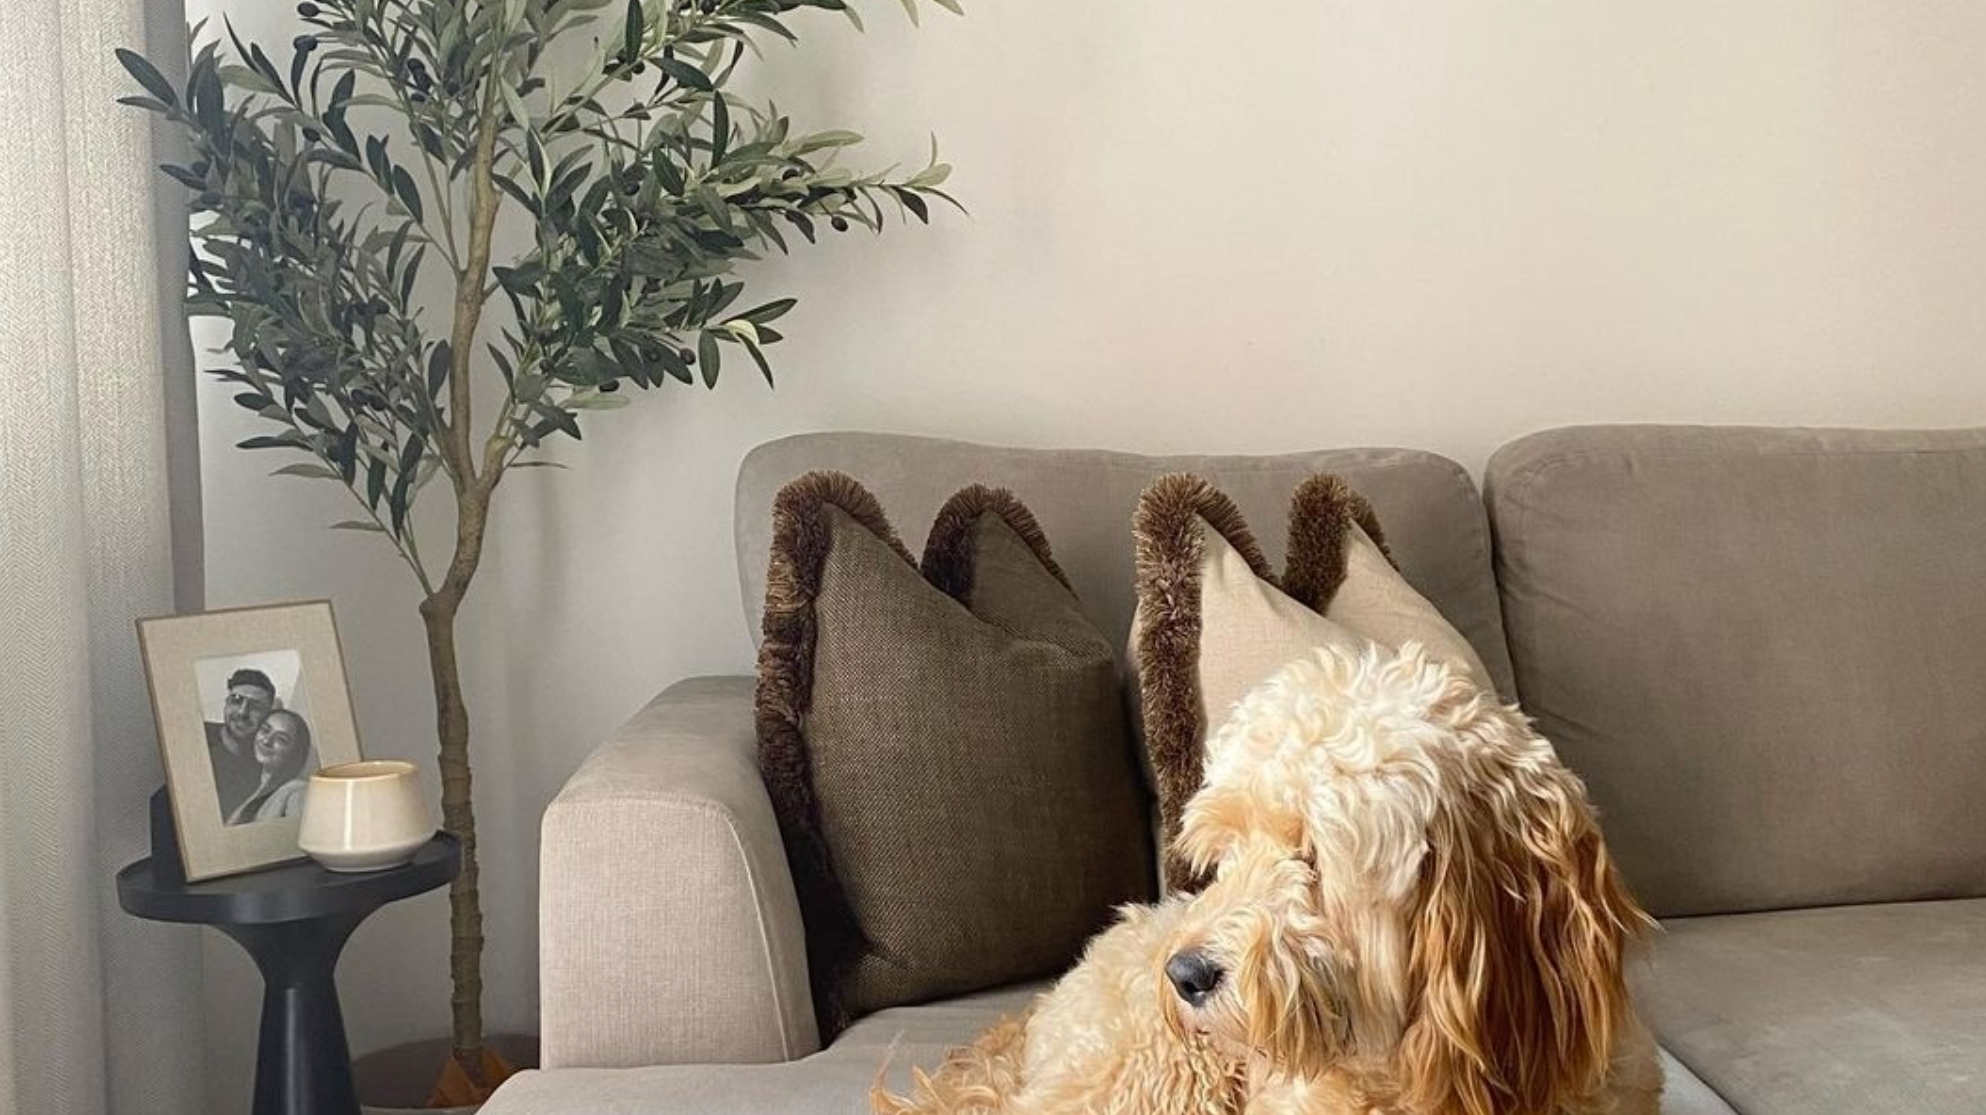 Embrace Greenery Safely: Why Premium Faux Plants from Artiplanto.com Are a Pet-Friendly Choice